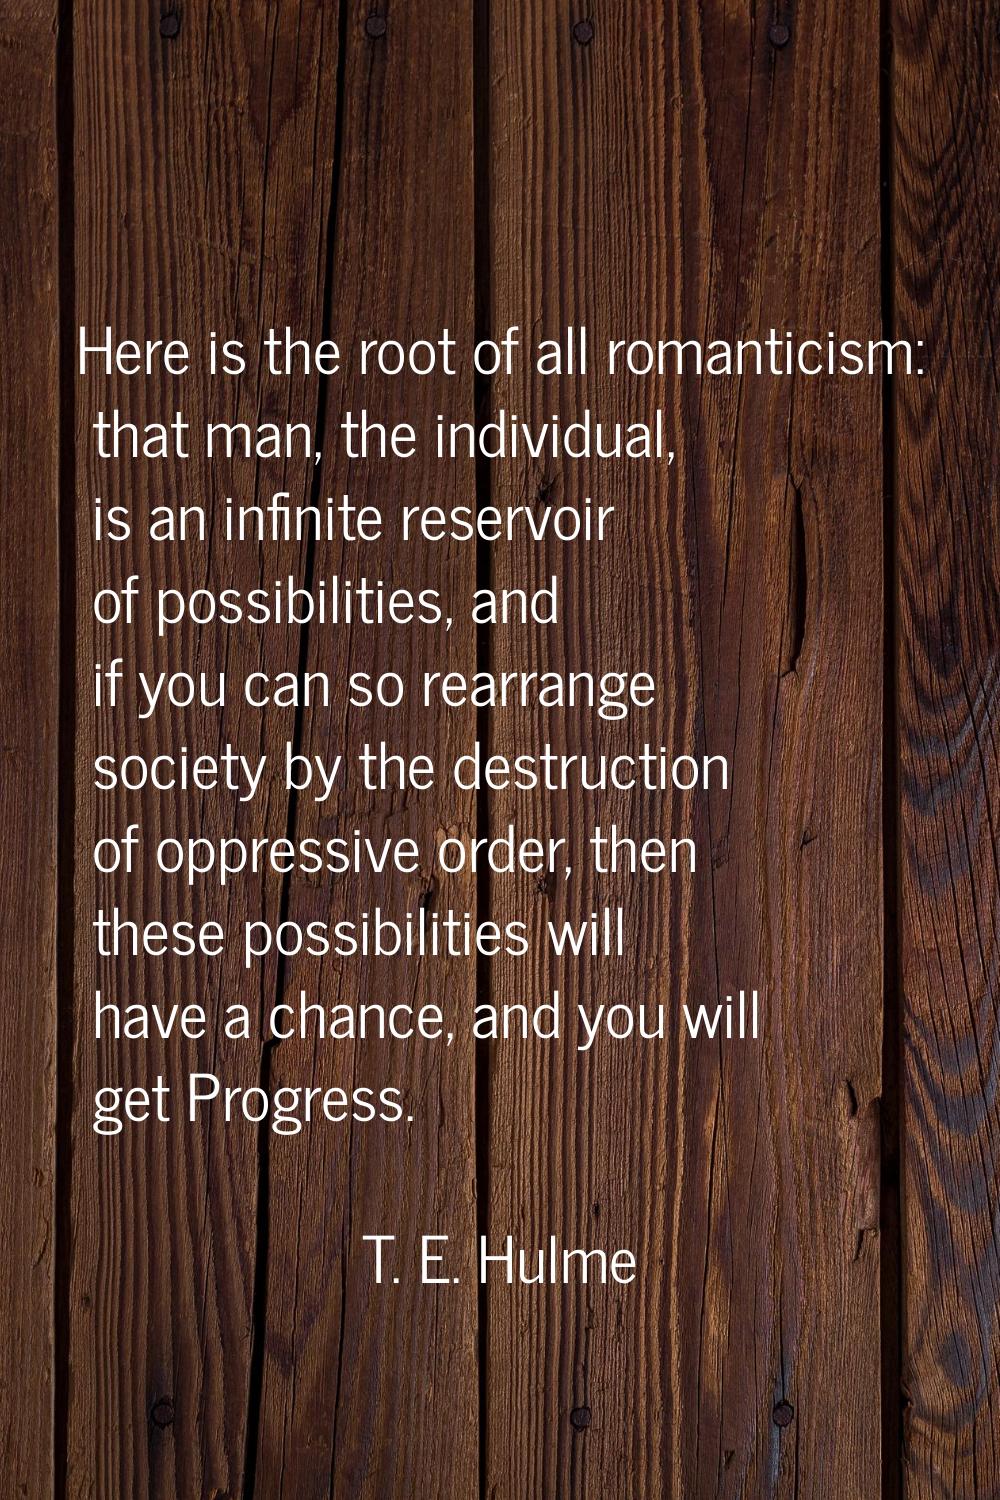 Here is the root of all romanticism: that man, the individual, is an infinite reservoir of possibil